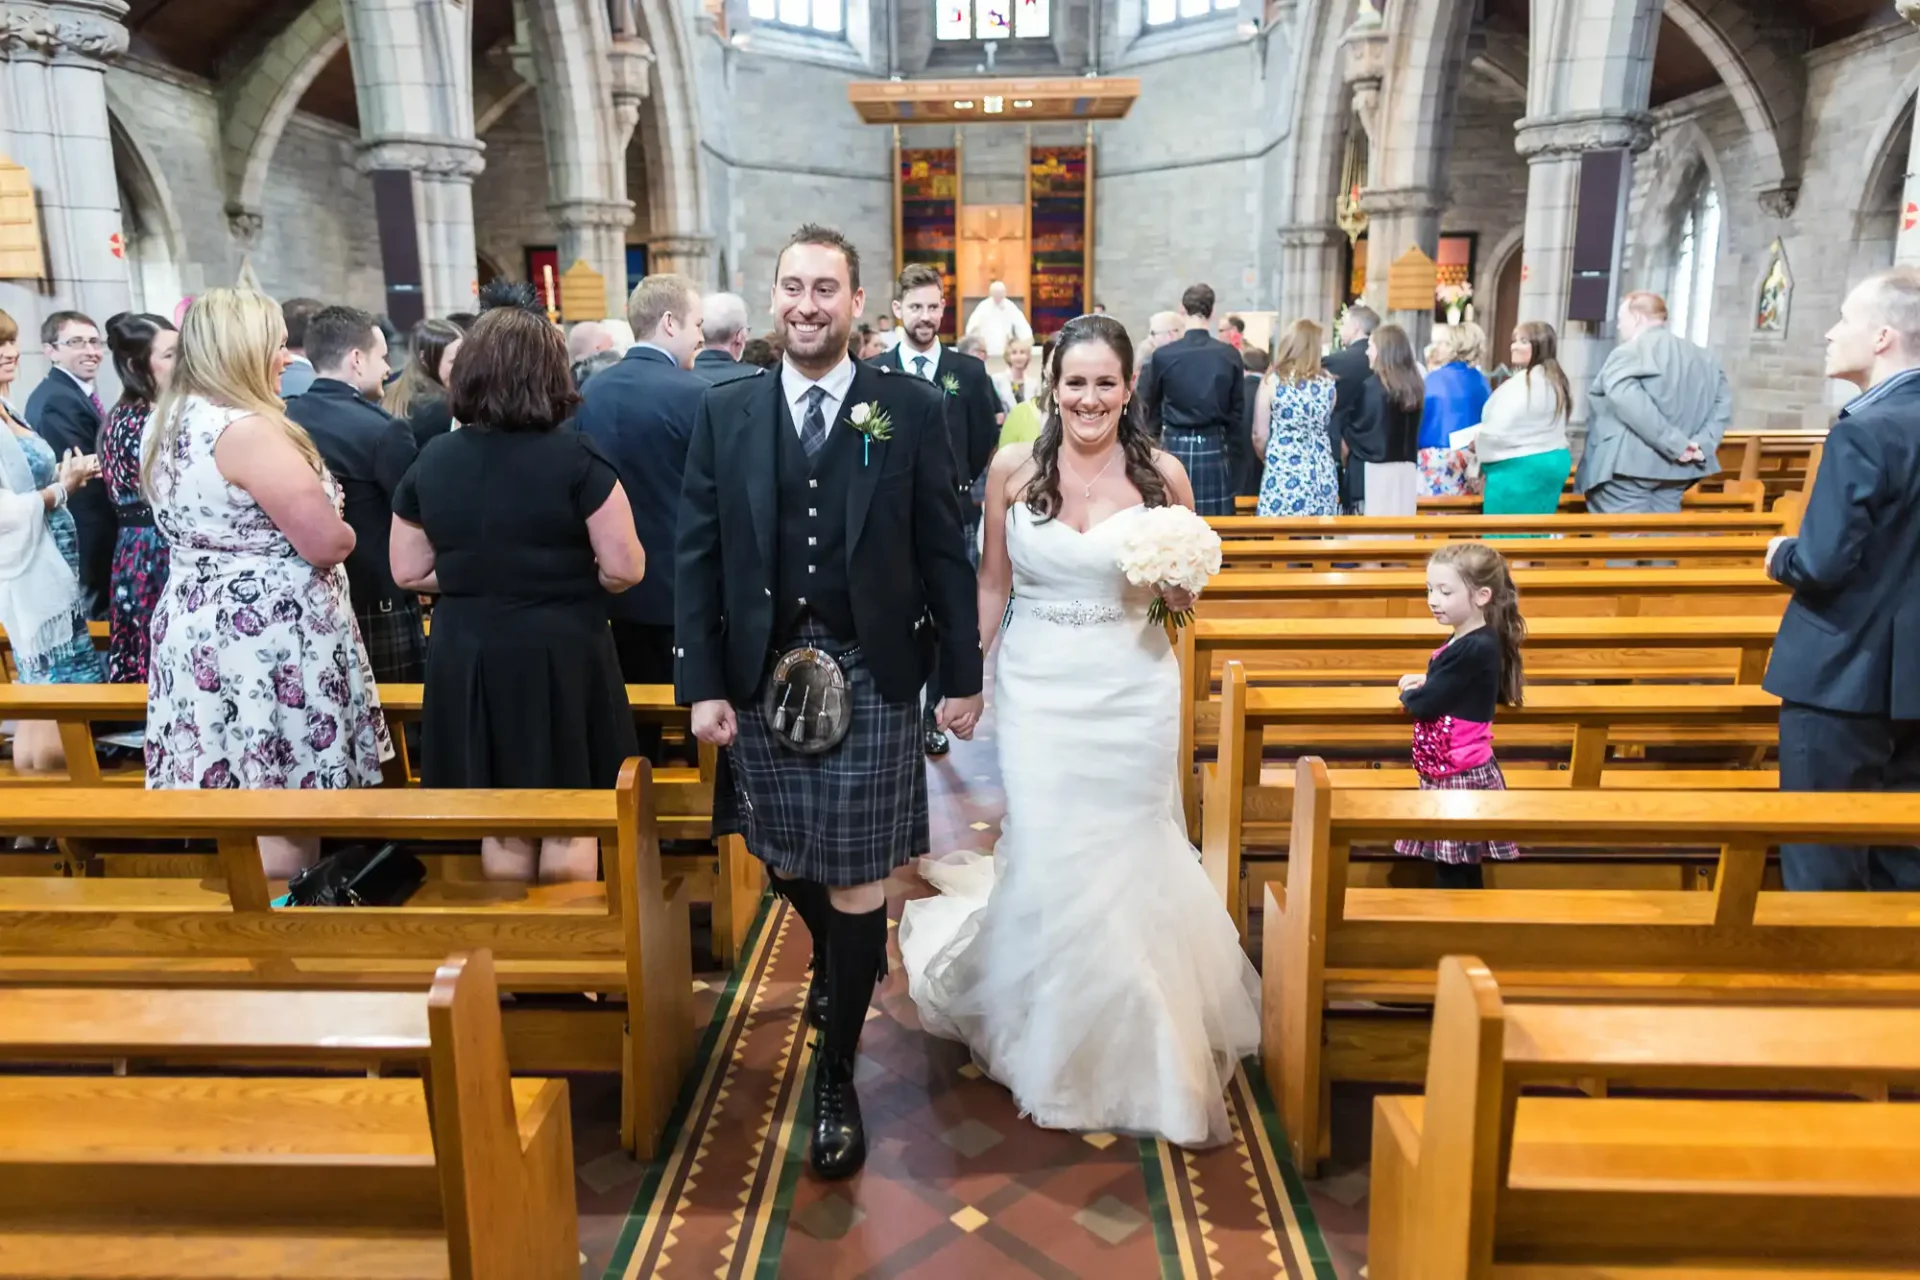 A newly married couple smiling as they walk down the aisle of a church, surrounded by guests. the groom wears a kilt and the bride wears a traditional white gown.